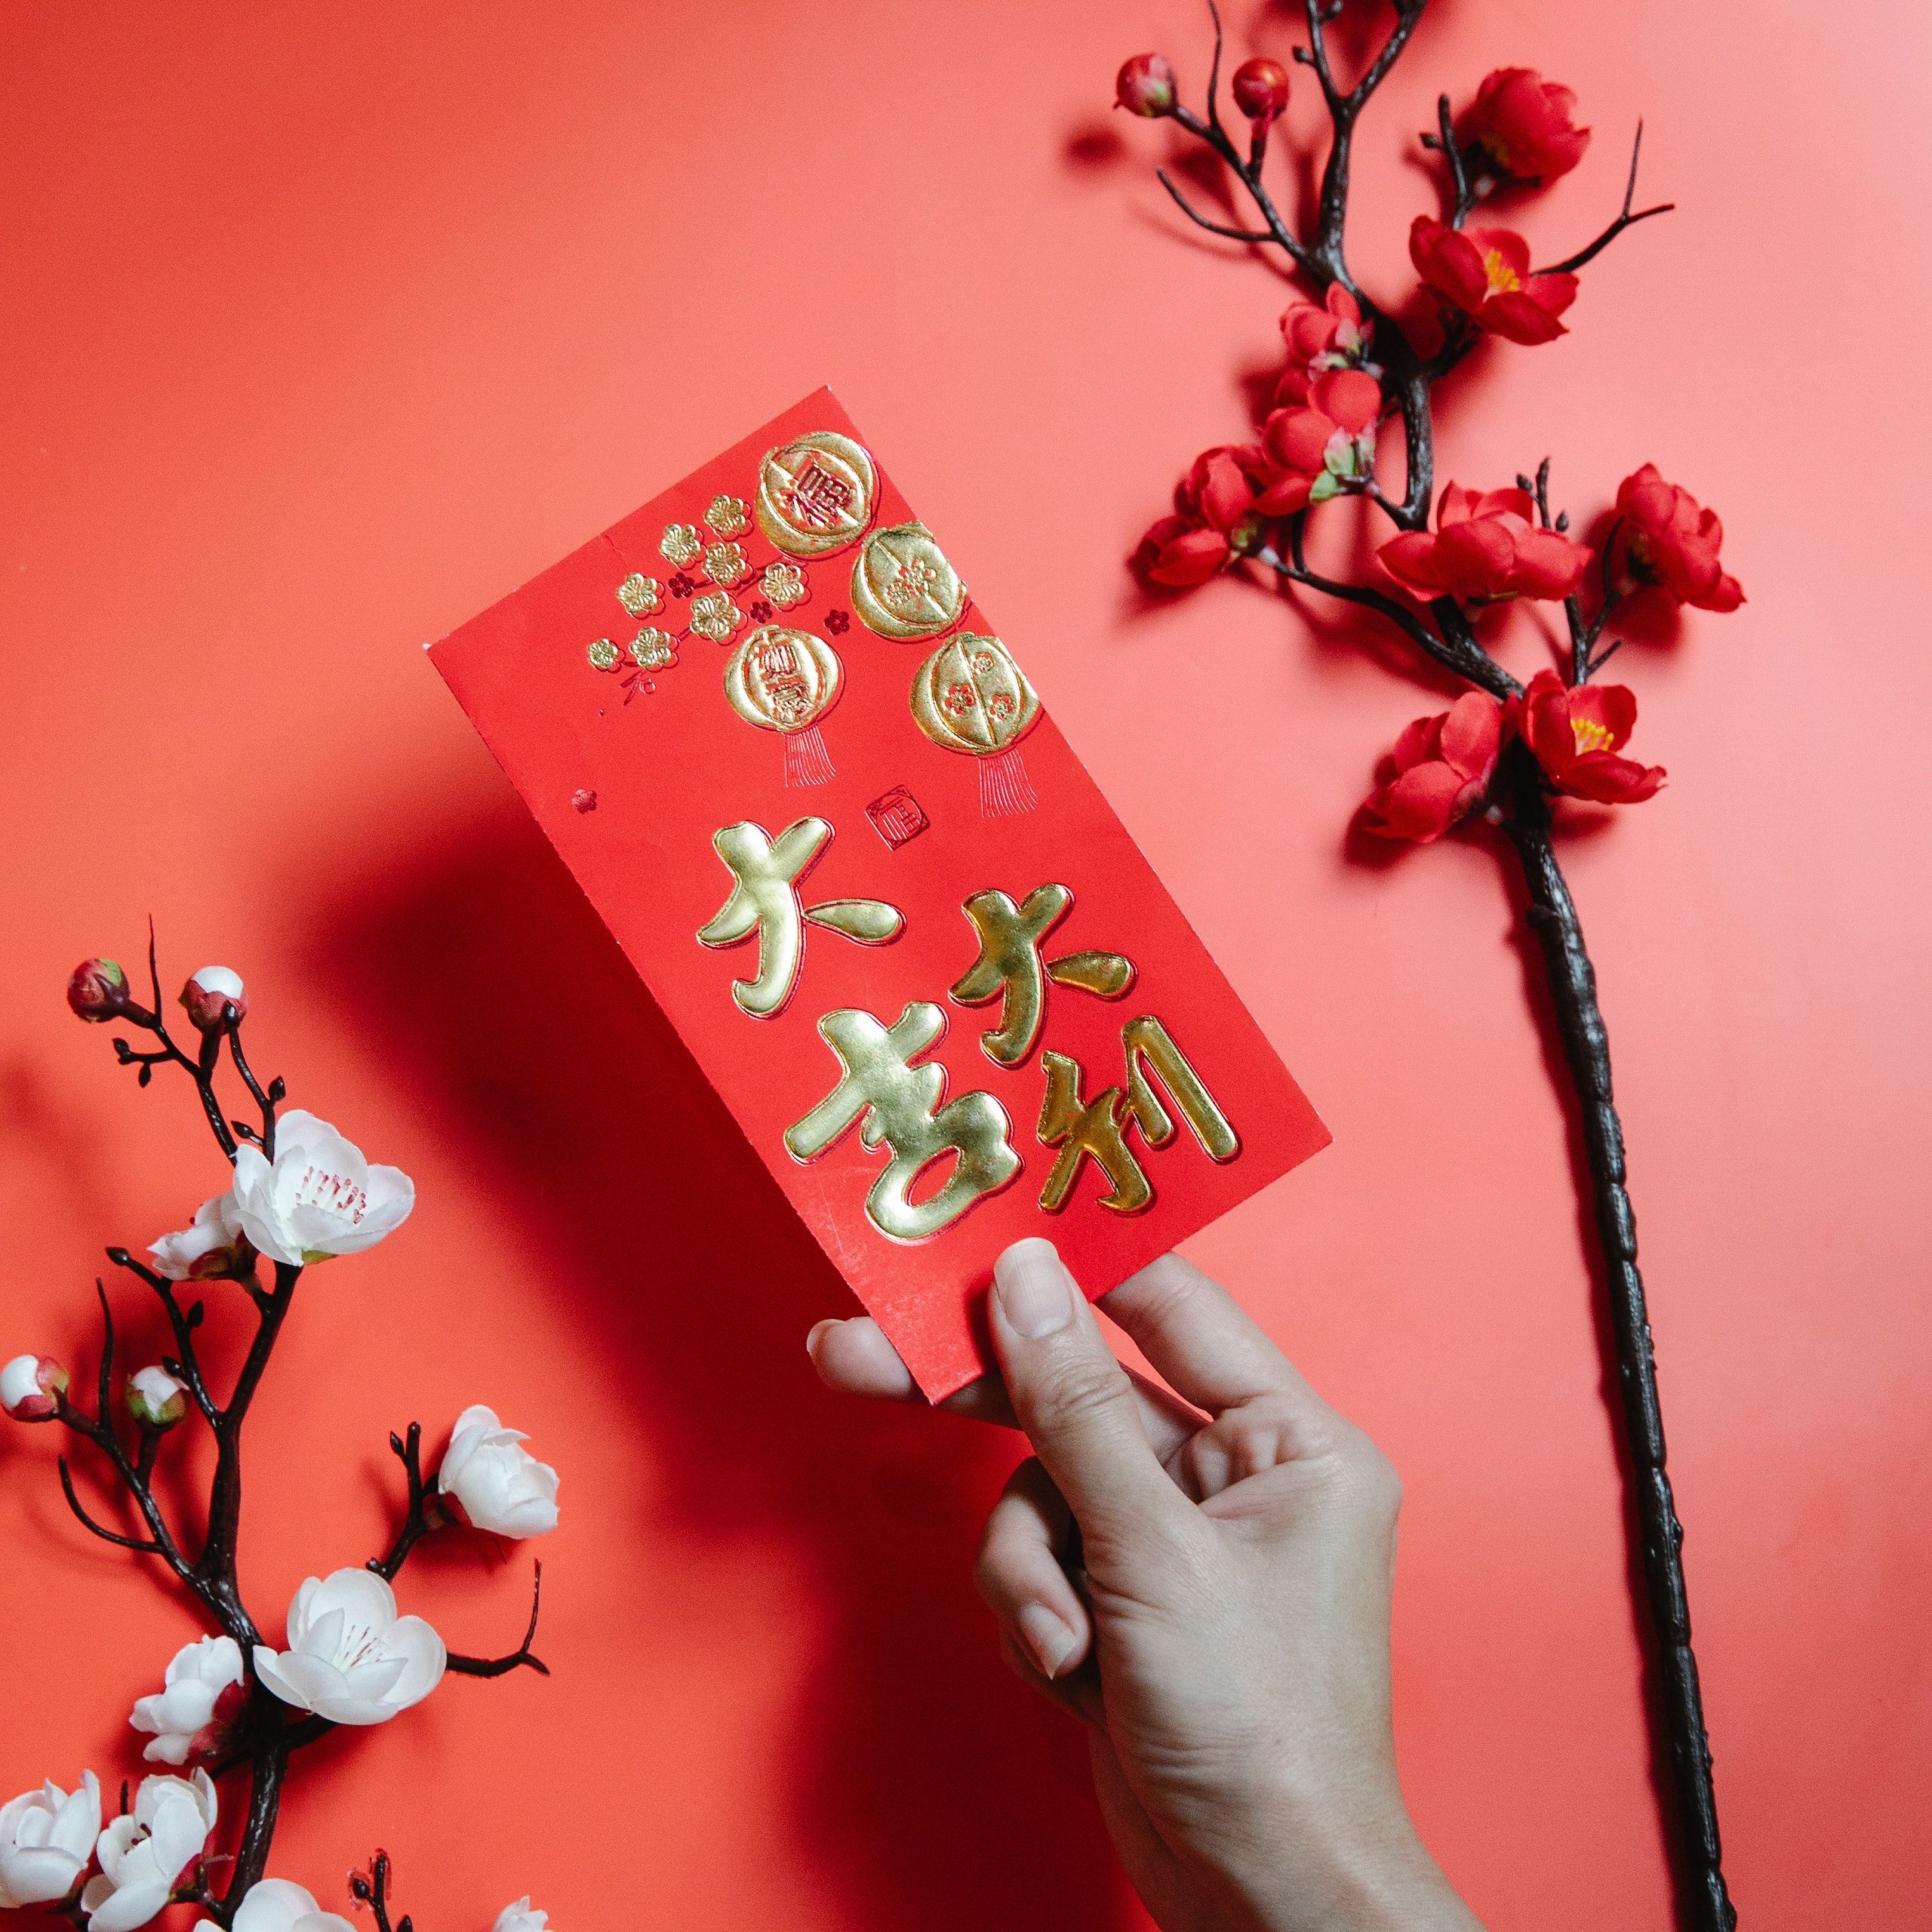 20 of our favourite lai see designs for Lunar New Year 2019